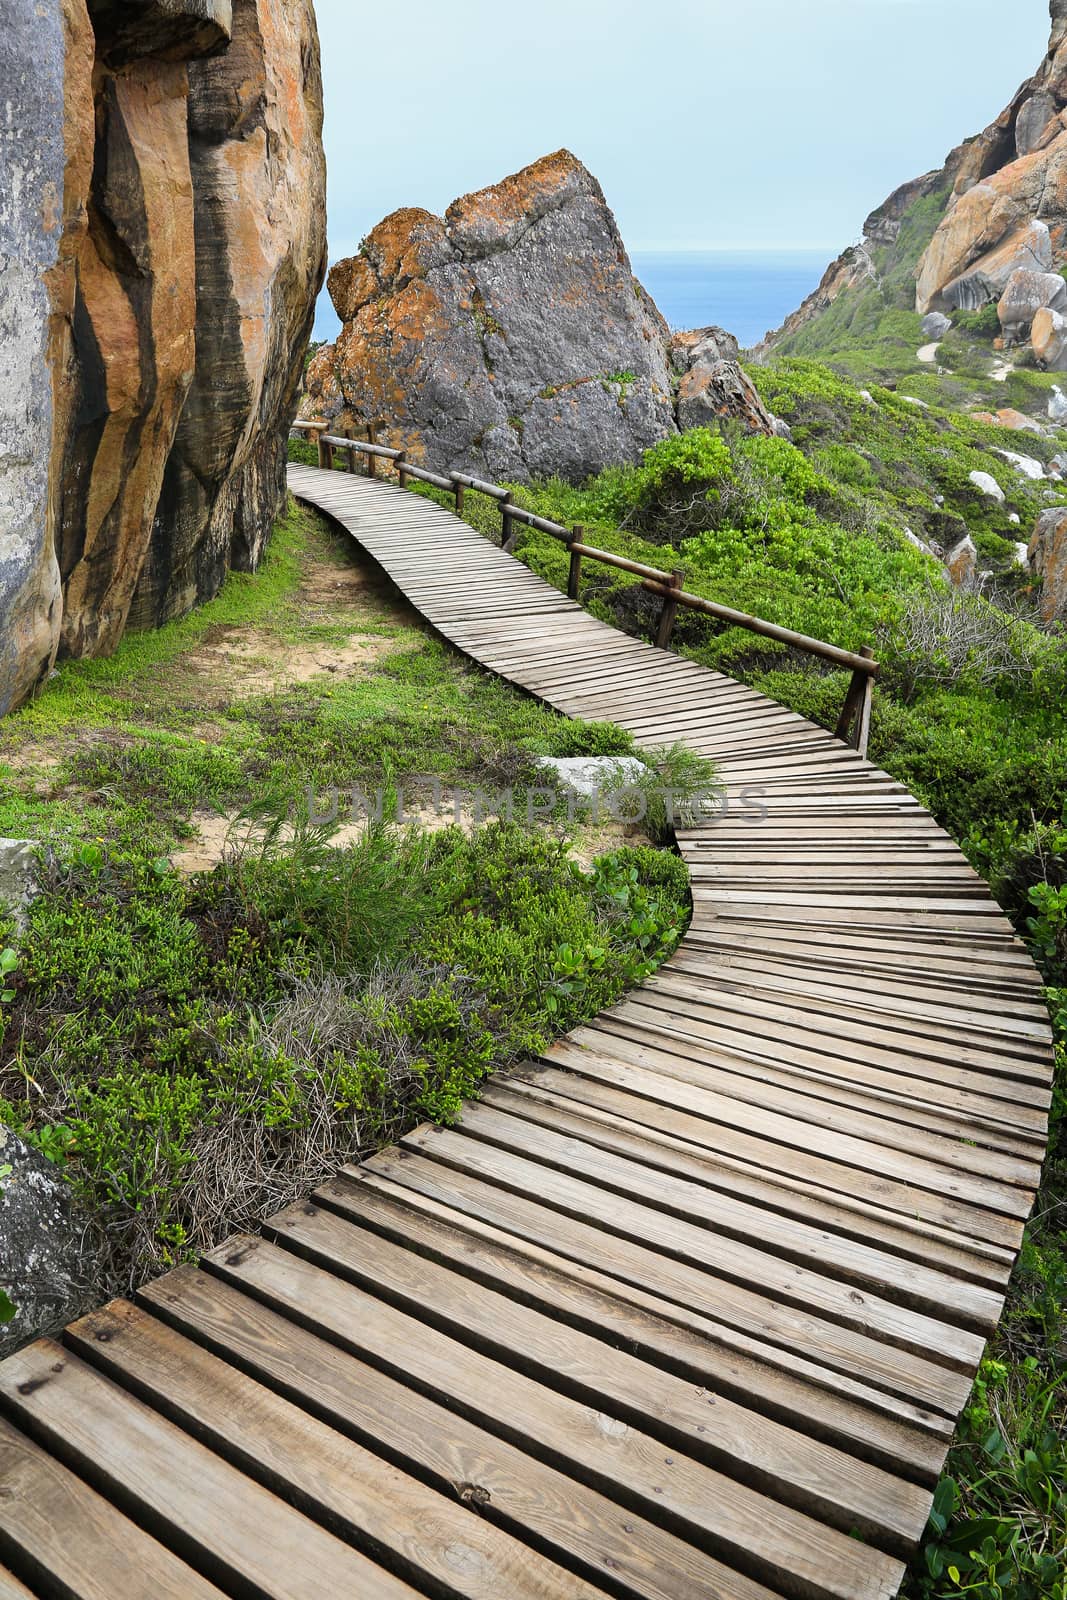 Wooden slatted walkway over the vegetation and between rocks at the coast in South Africa